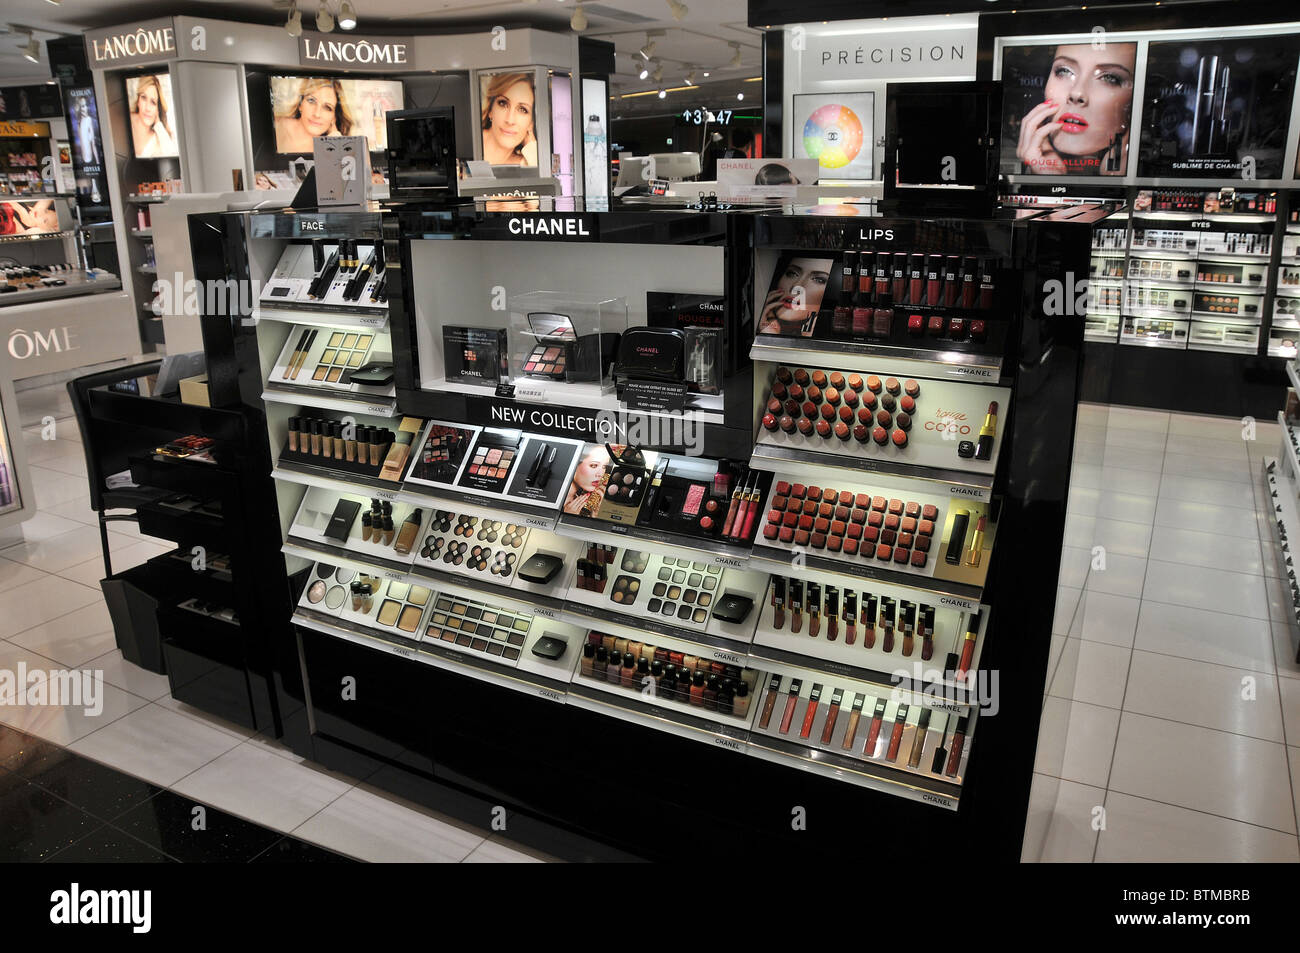 Chanel Opens Beauty and Perfume Boutique in Dubai